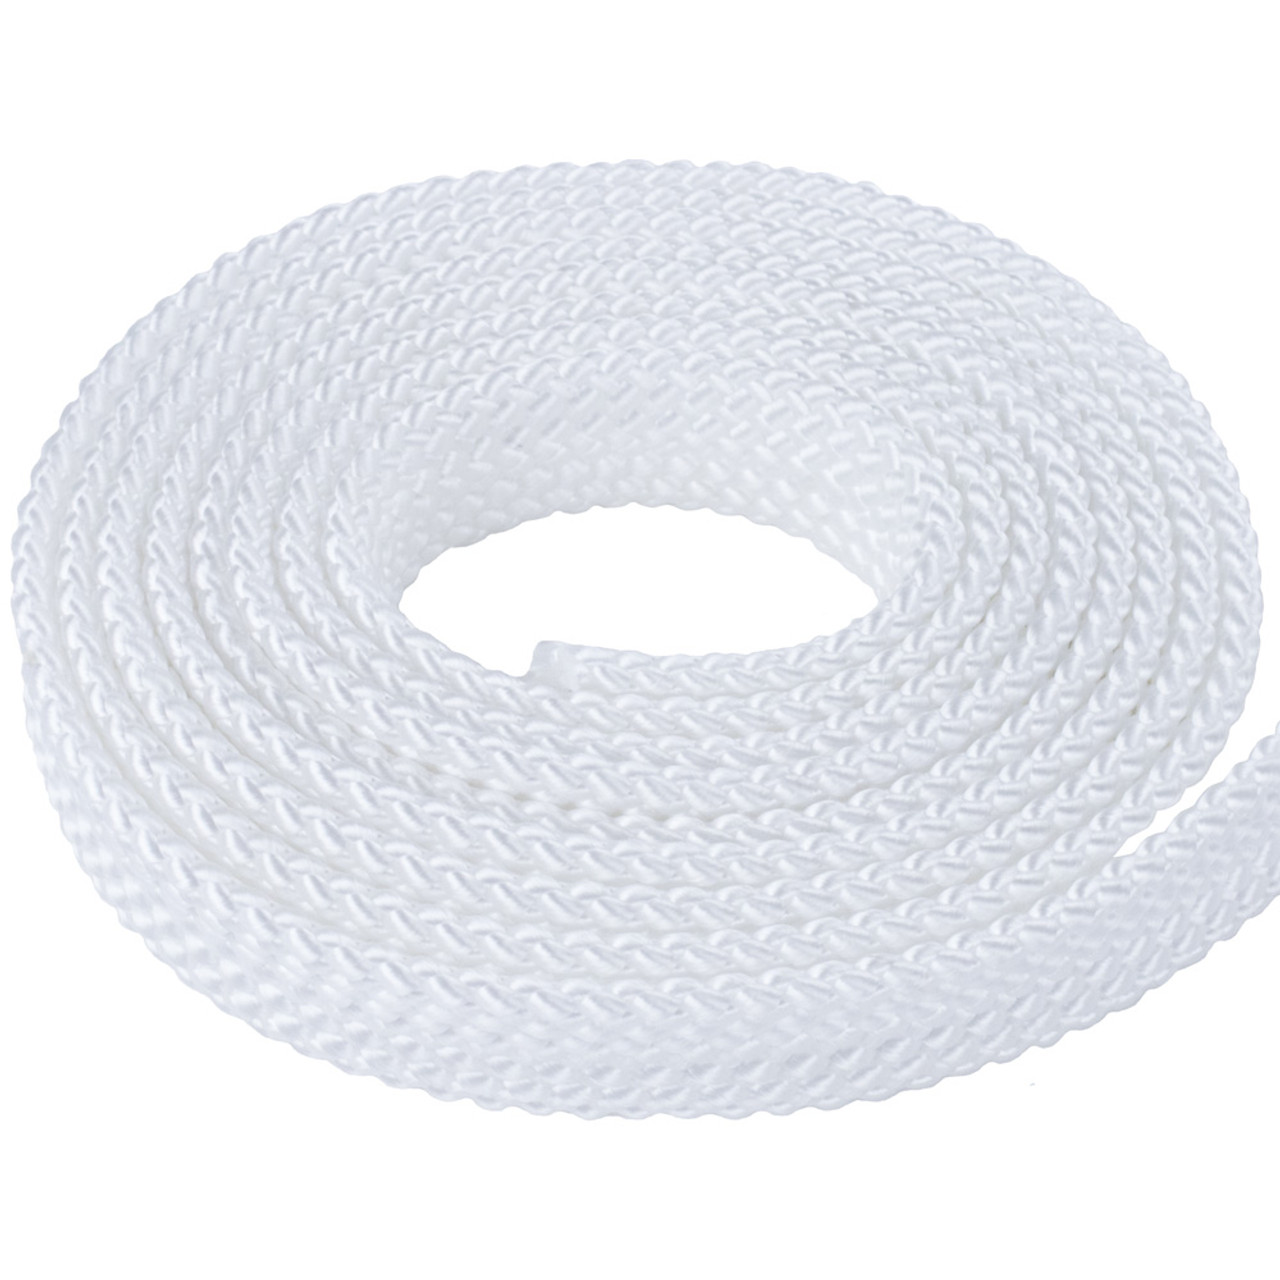 PolyPro 1in Flat Braid Rope - White